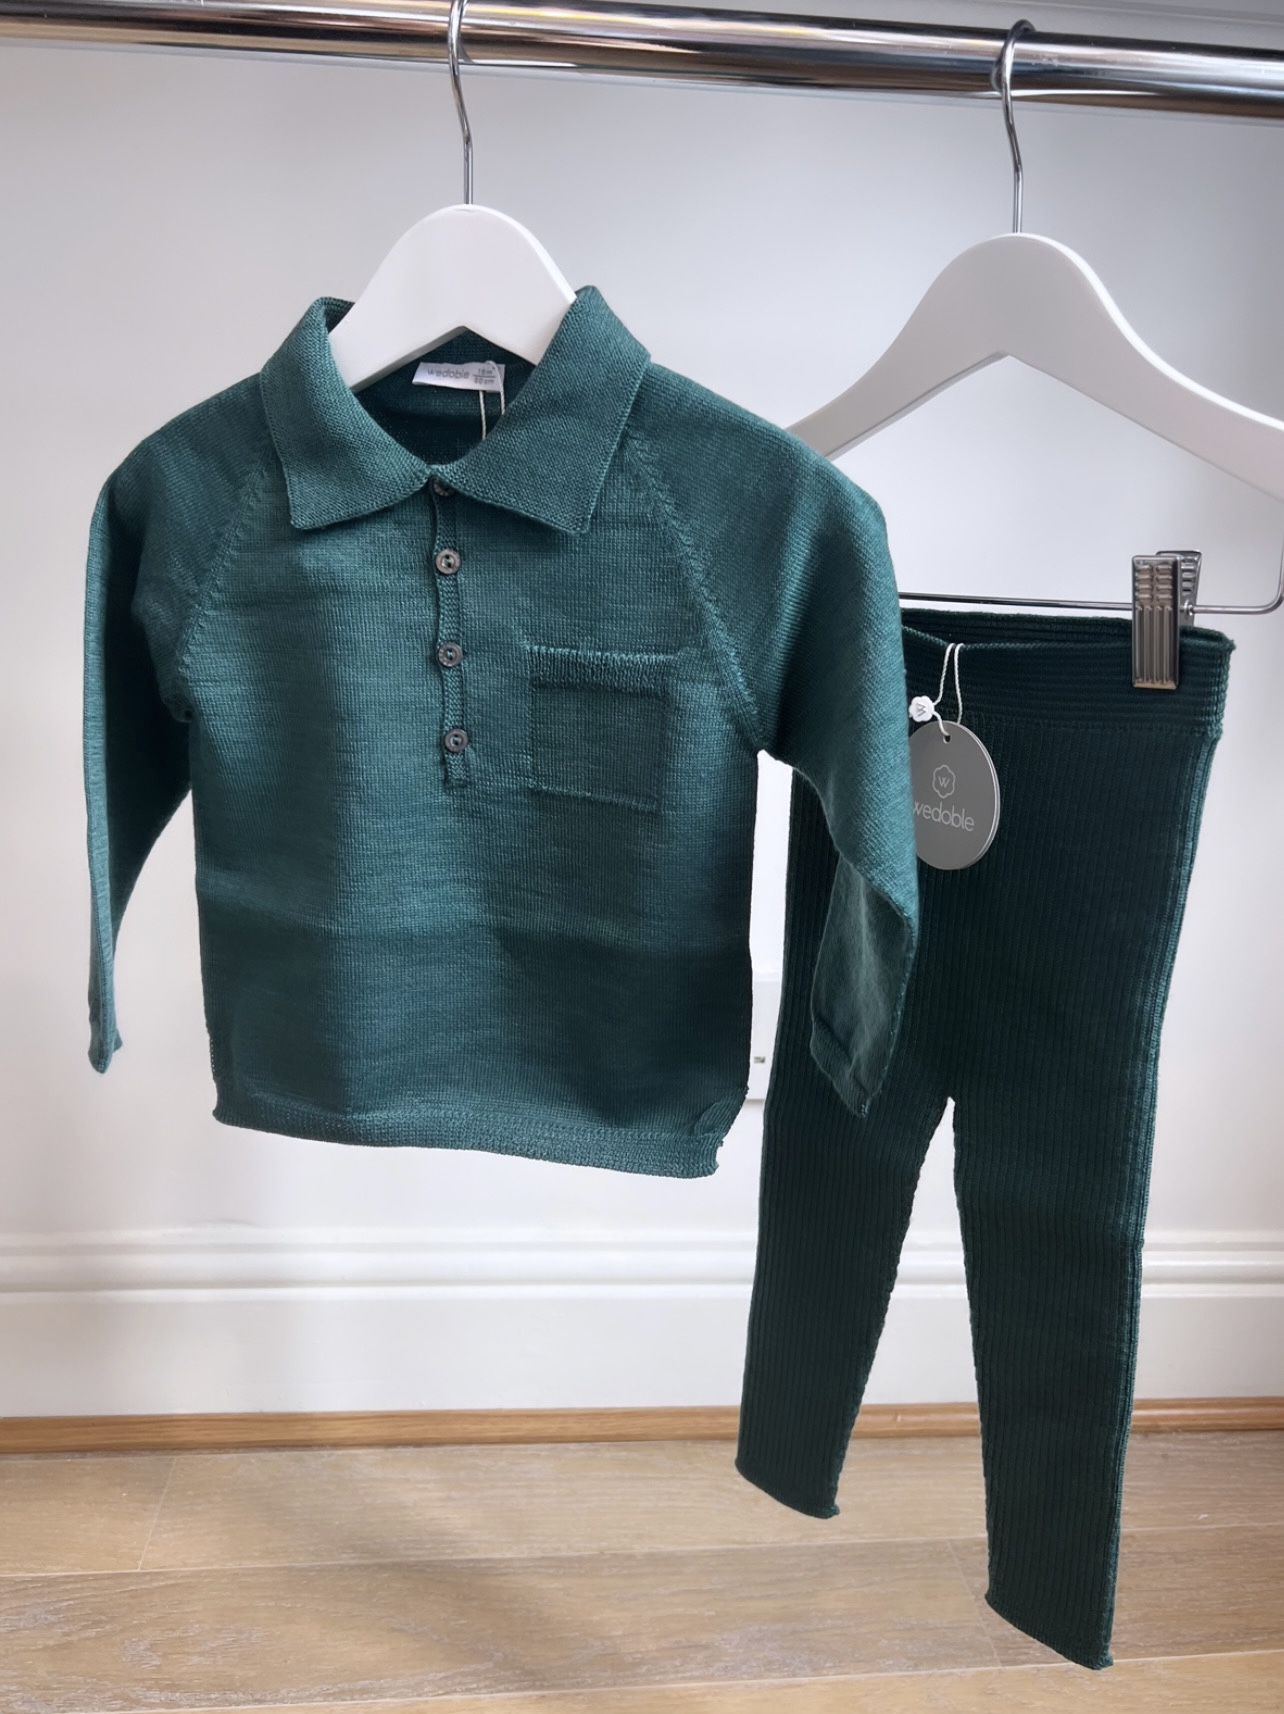 Wedoble Teal Green Polo Set - Fine Knit